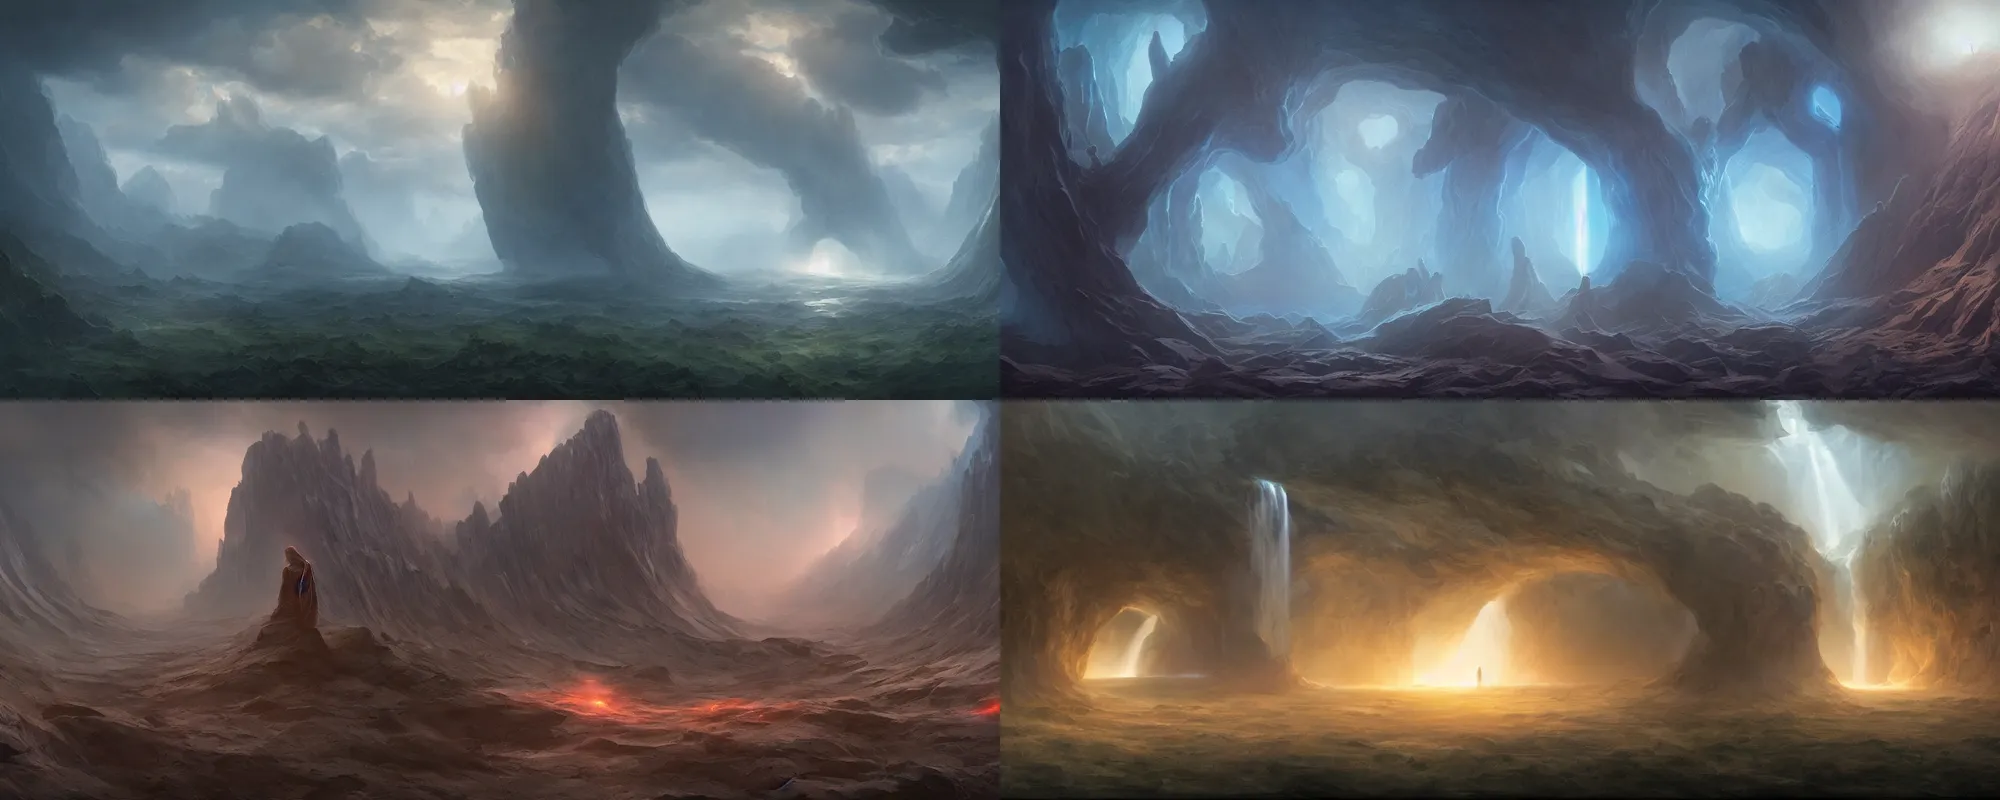 Prompt: Concept_Art_of_cinematography_from_Terrence_Malick_film_by_Noah_Bradley_depicting_the descent of spirit into matter